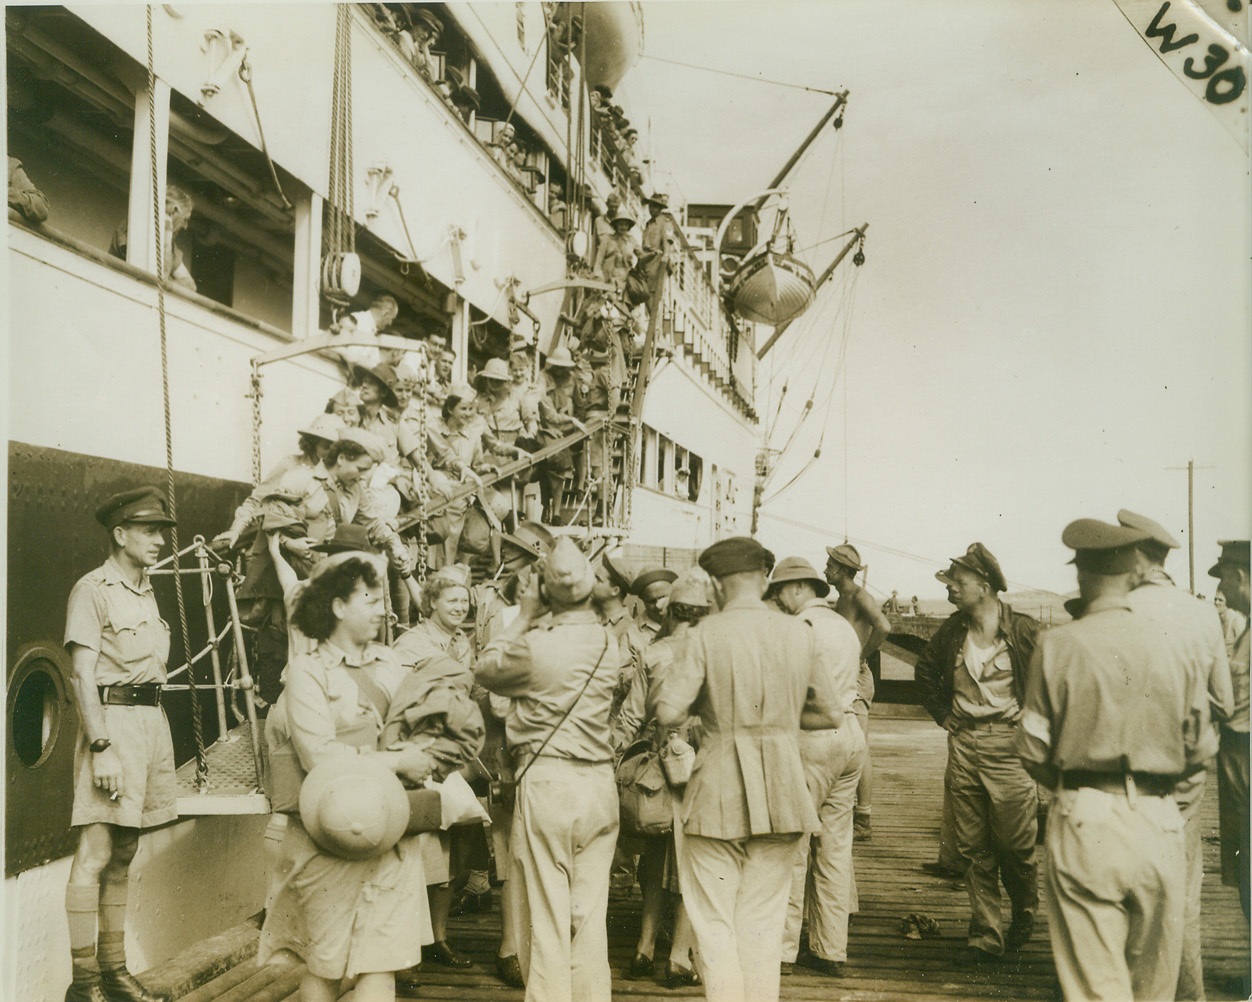 U.S. ARMY NURSES ARRIVE IN NEW GUINEA, 11/12/1942. NEW GUINEA – Eighteen U.S. Army nurses, the first white women to set foot in New Guinea since March 1942, arrive at an Allied advance base in the South Pacific stronghold. No other American nurses have been sent to the unnamed base, close to the fighting areas. Credit: ACME;